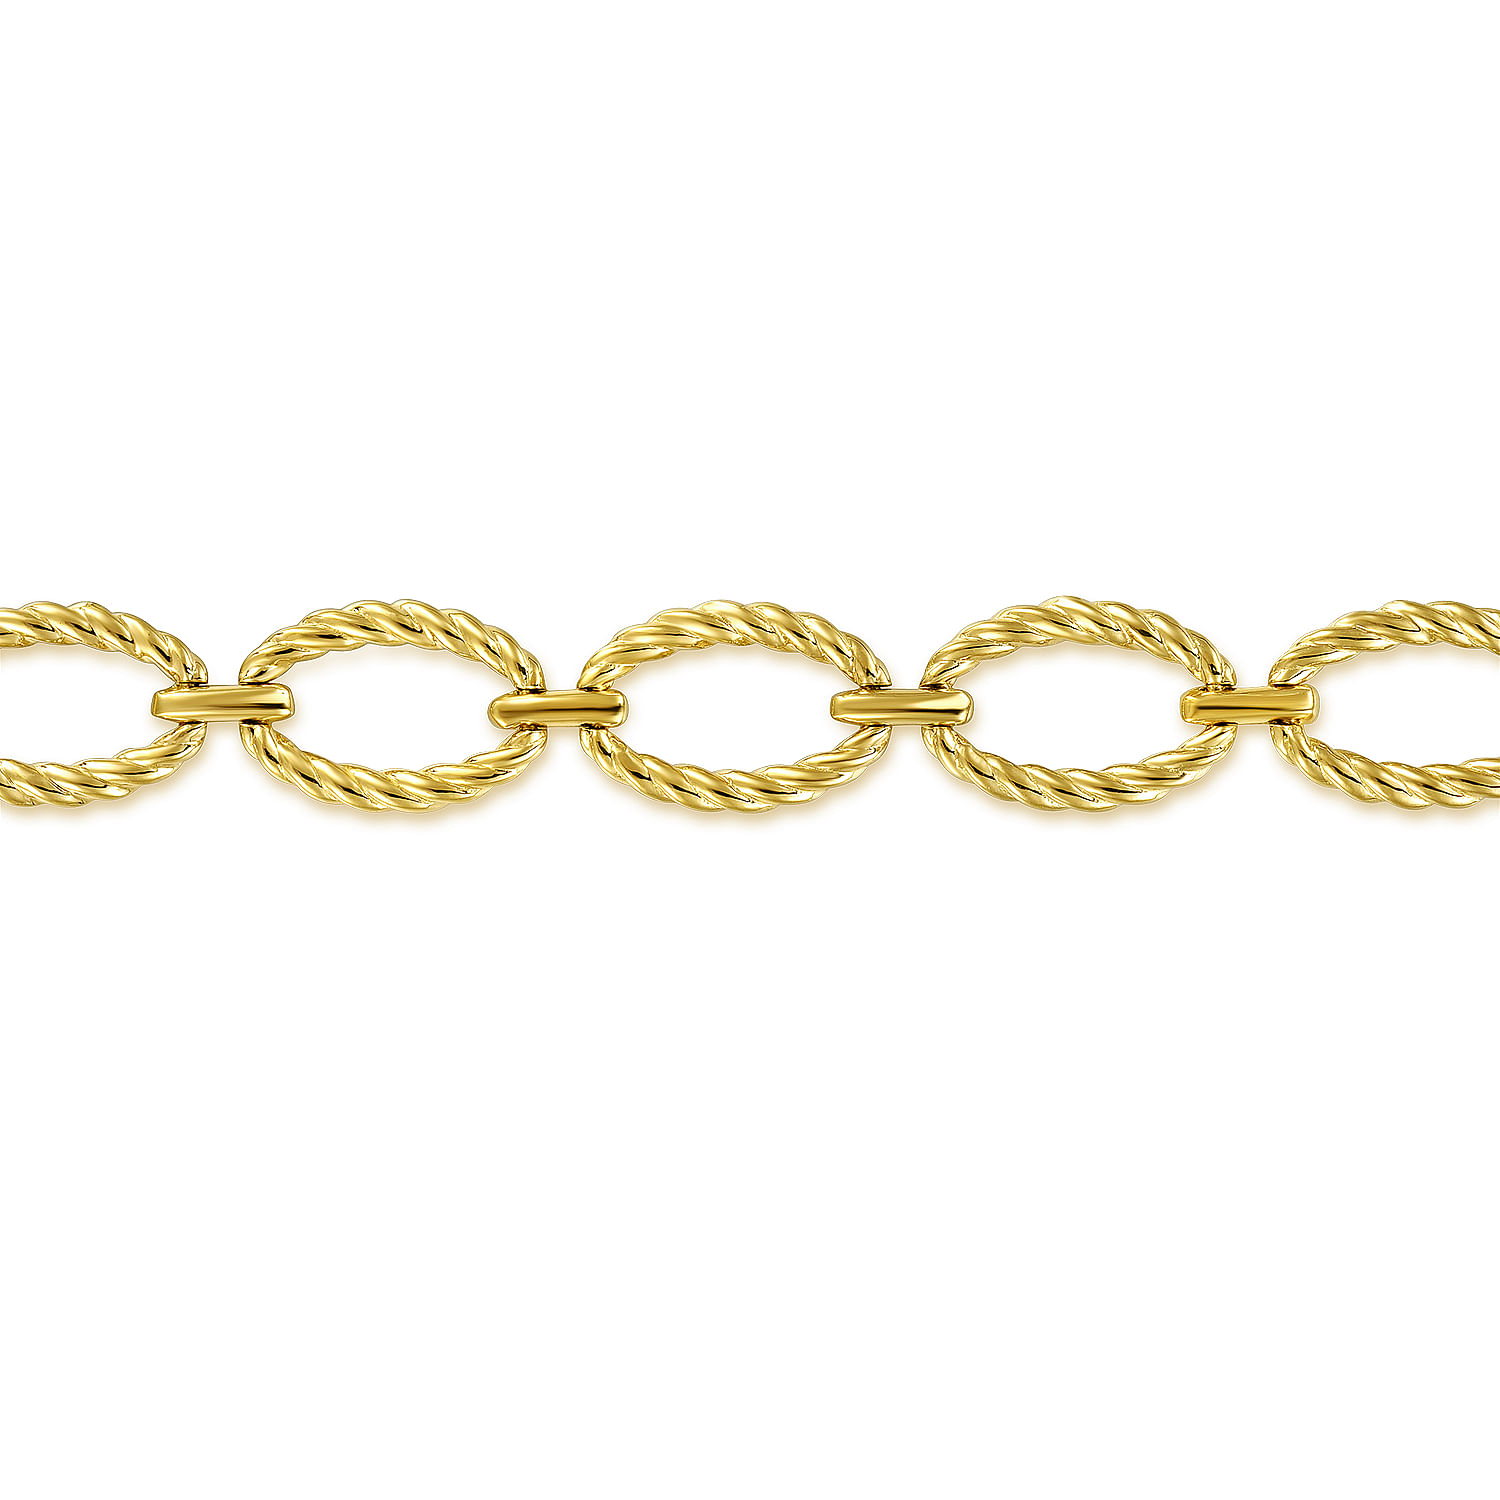 14K Yellow Gold Twisted Rope Oval Link Bracelet